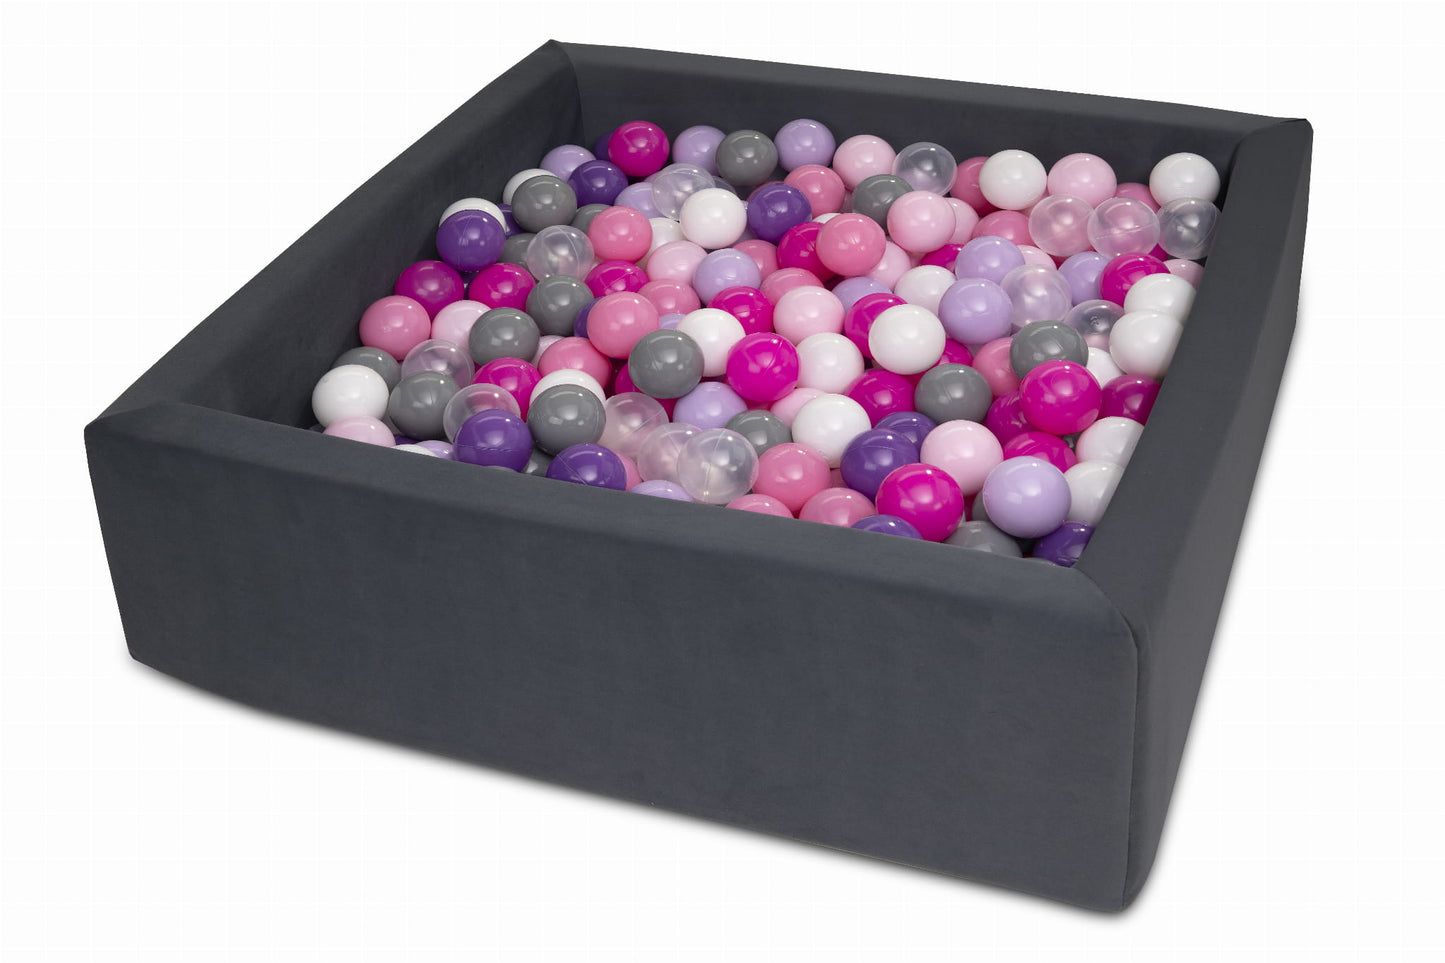 Ball Pool Ball Pool Square Soft For children with plastic balls